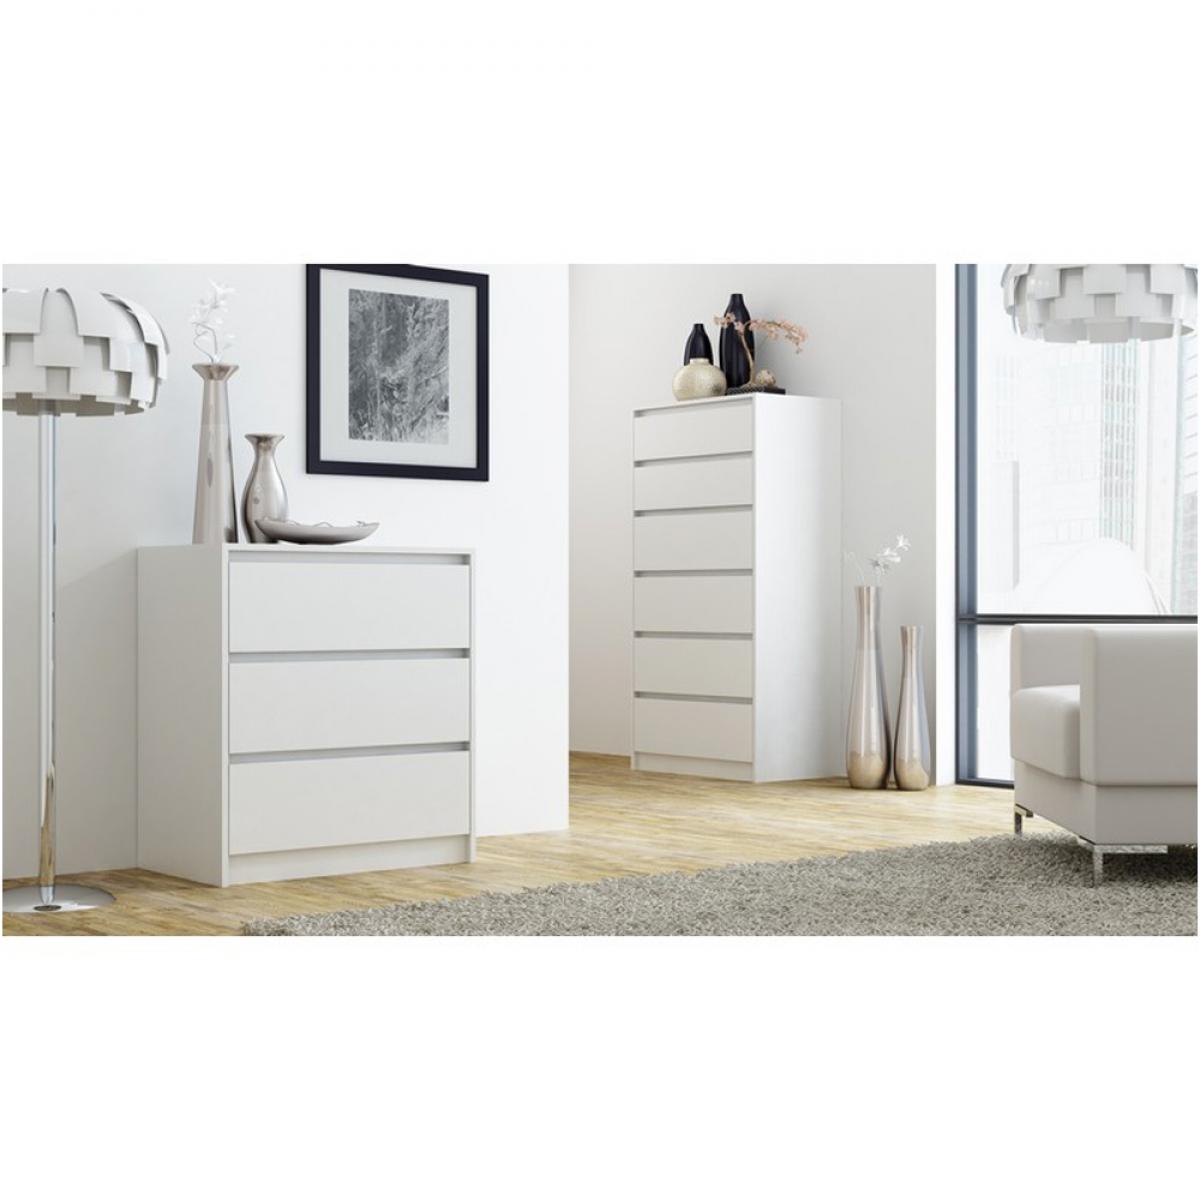 commode - climiconia - 70 cm - blanc - 3 tiroirs - style scandinave